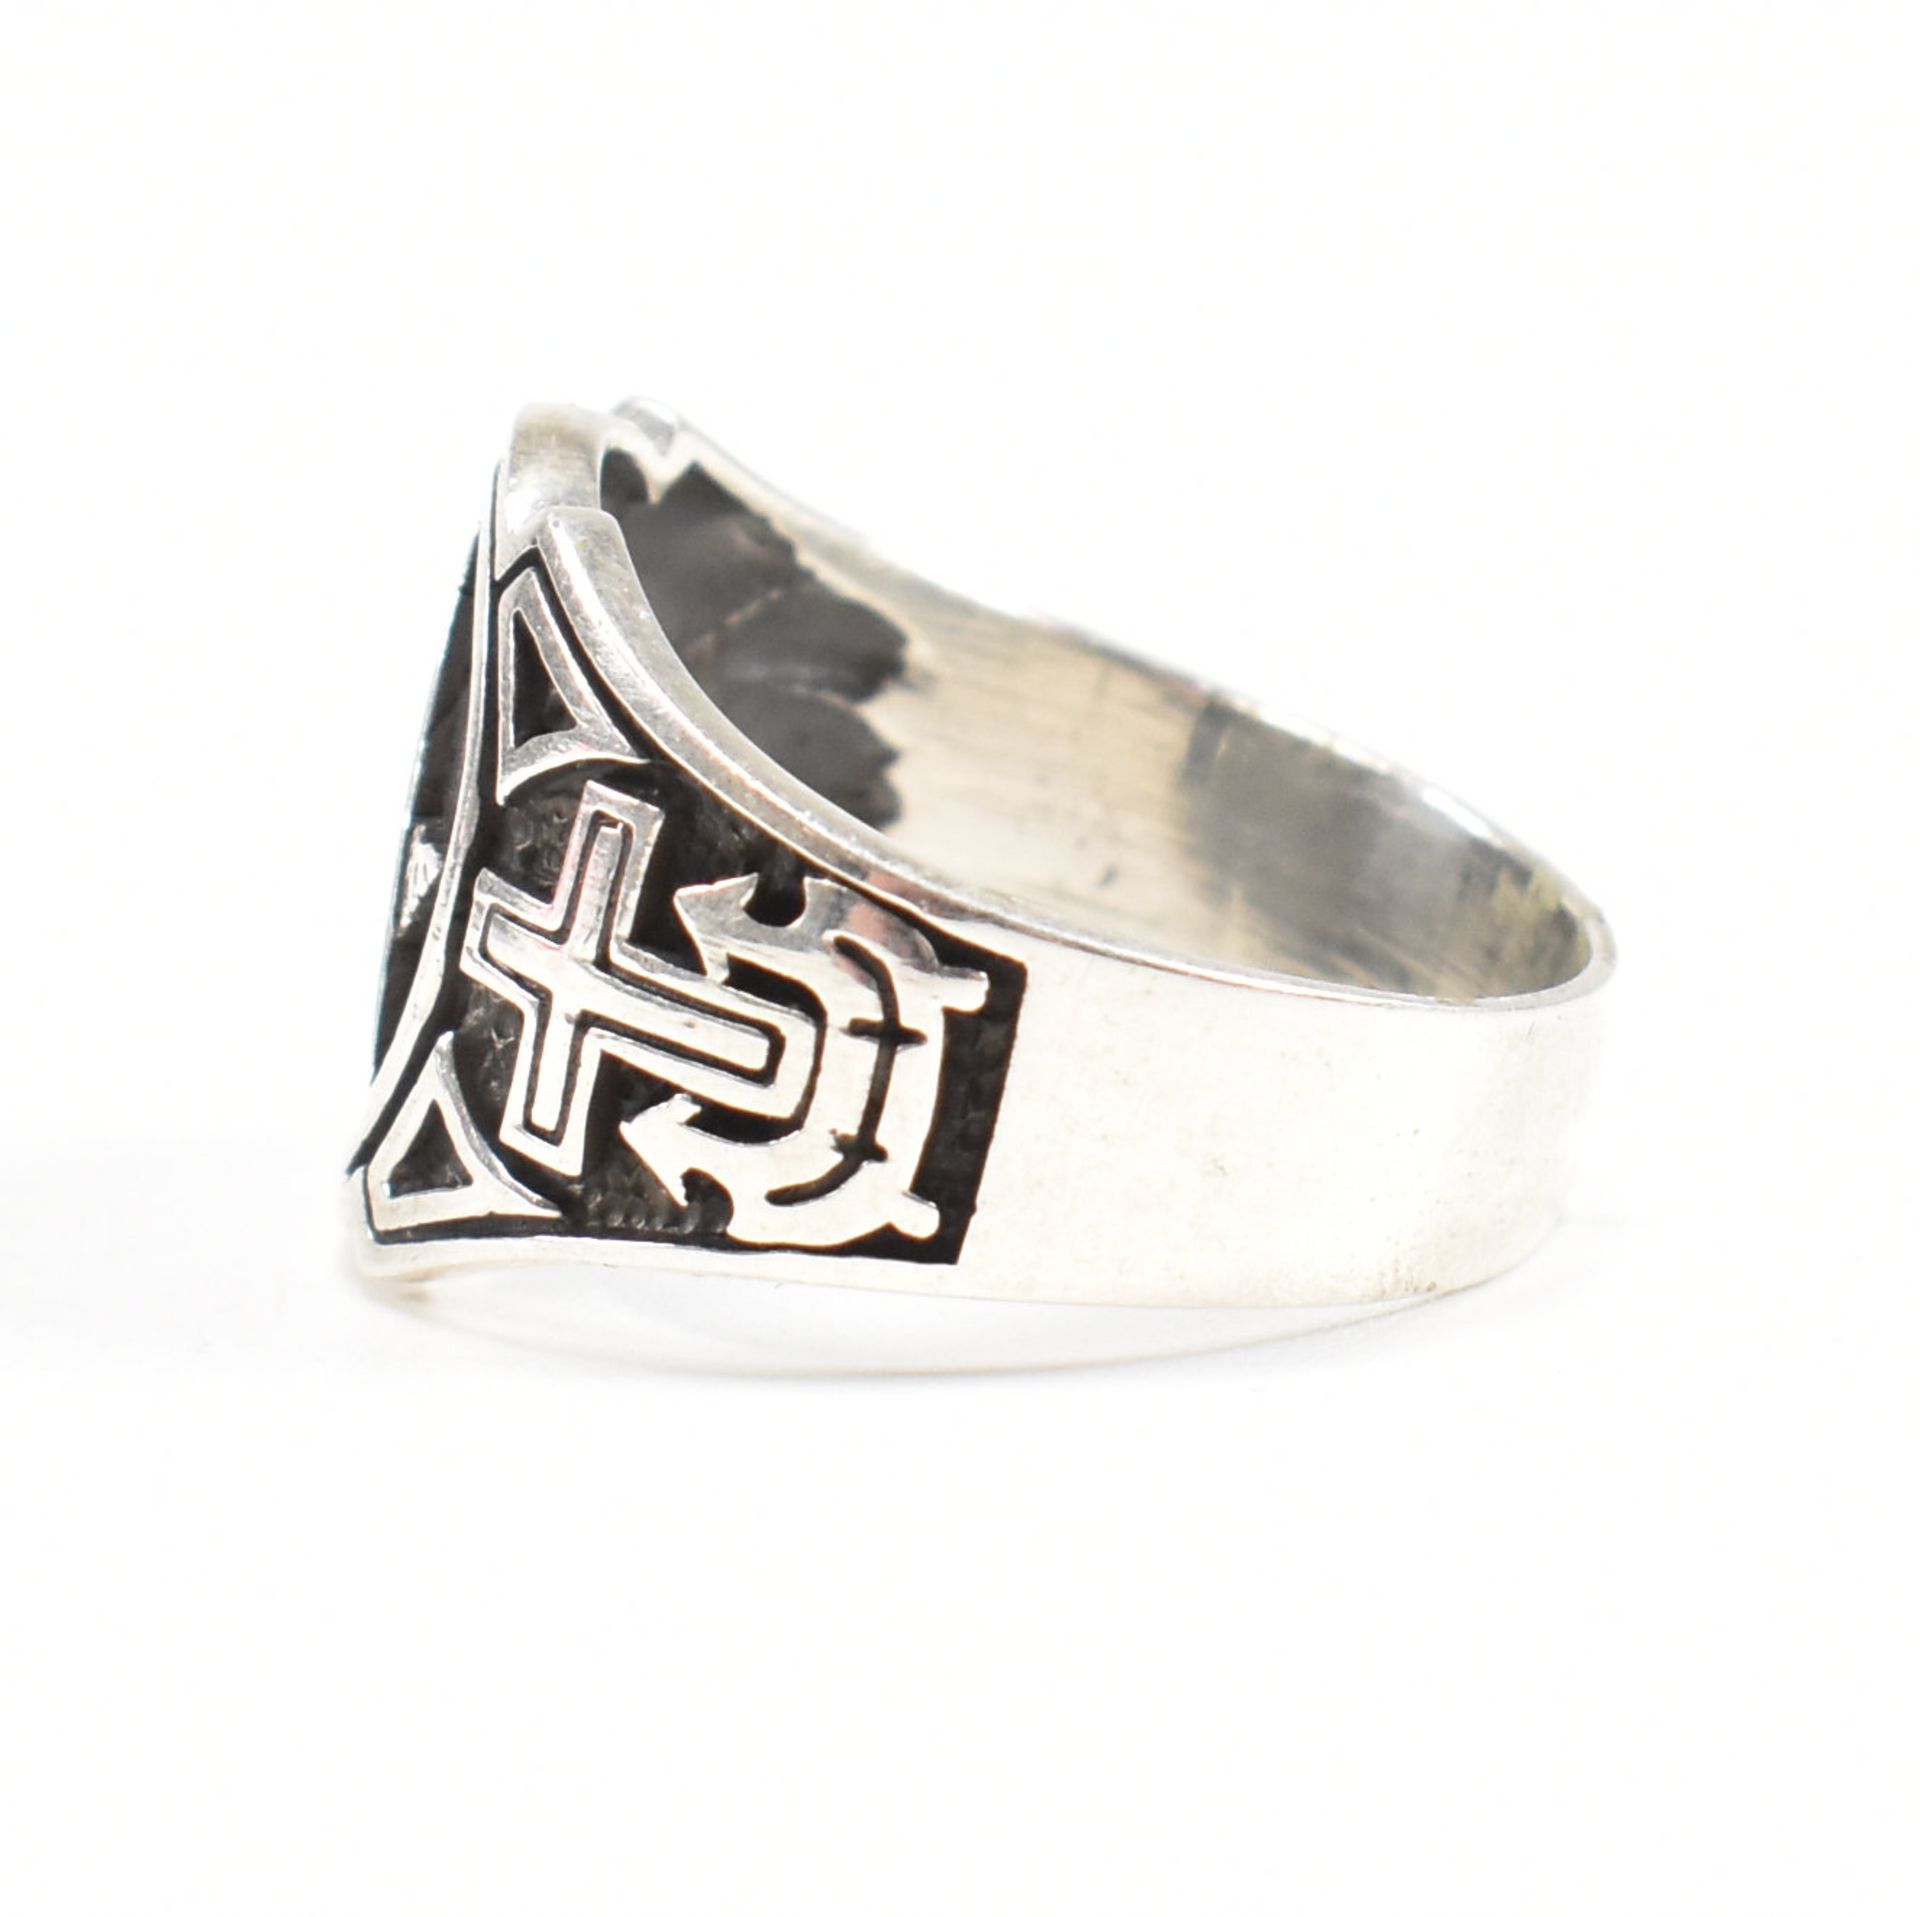 CONTEMPORARY 925 SILVER MASONIC STYLE RING - Image 4 of 7